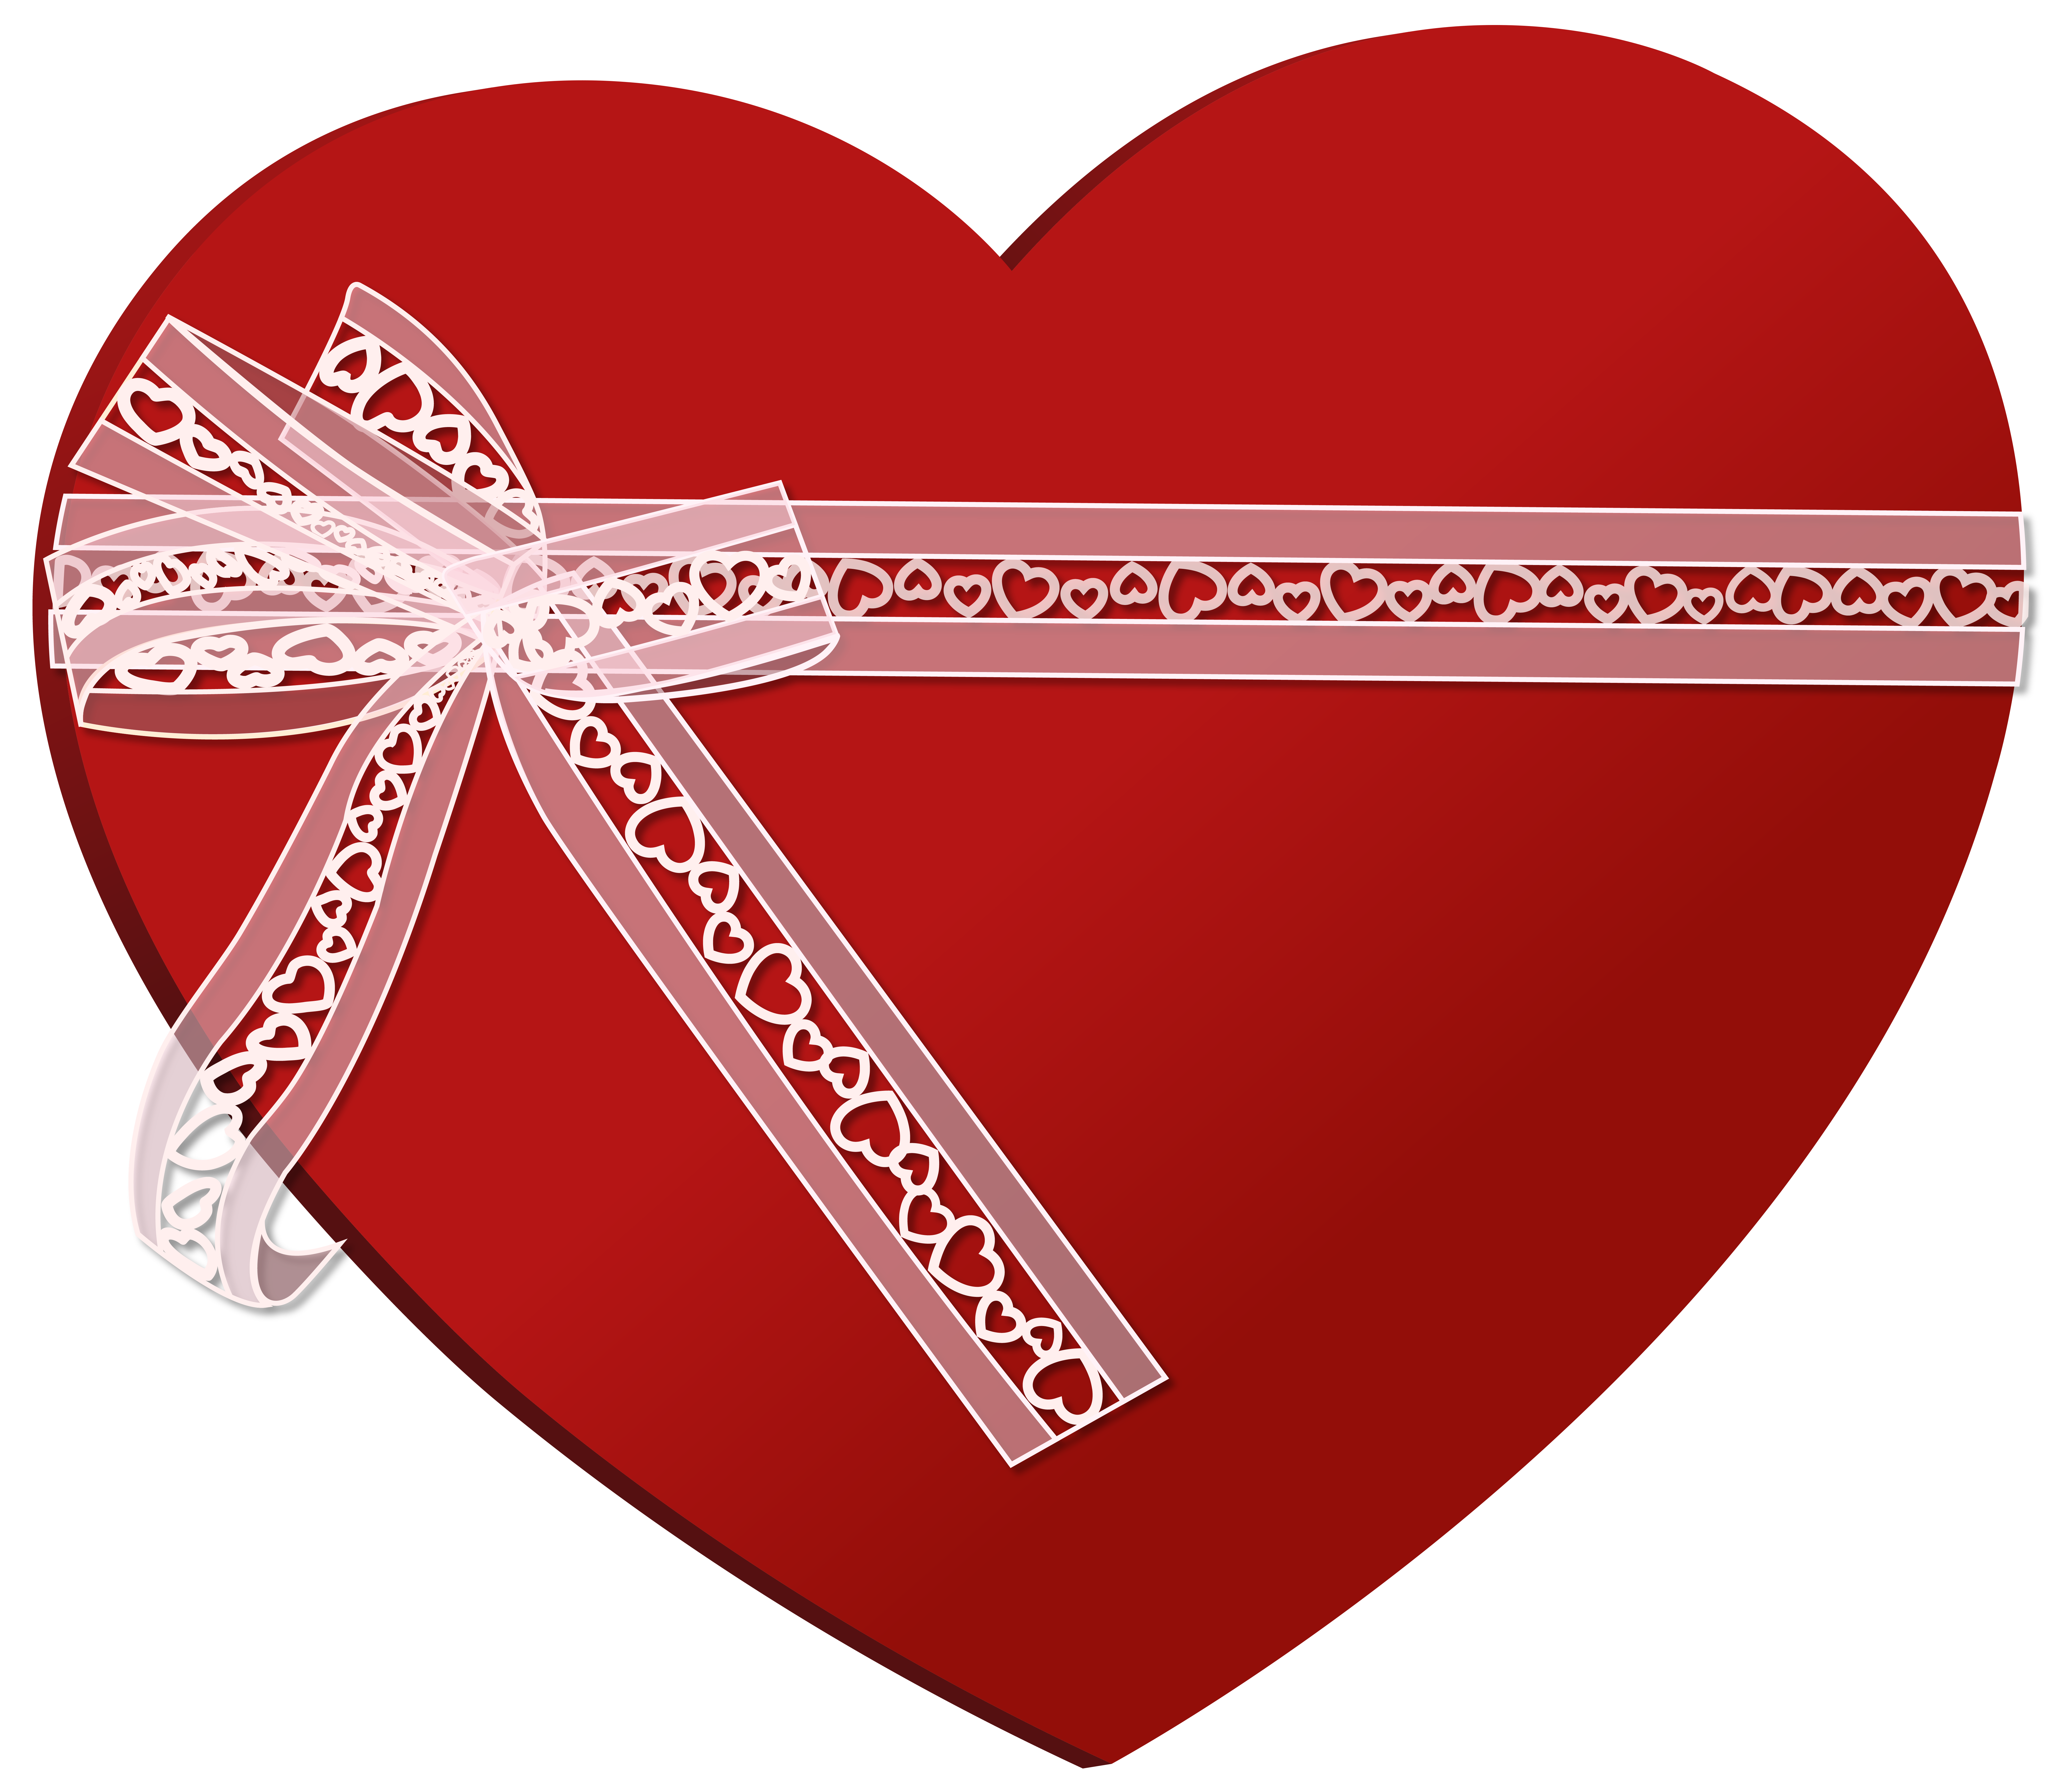 Heart with Heart Ribbon PNG Clip Art Image